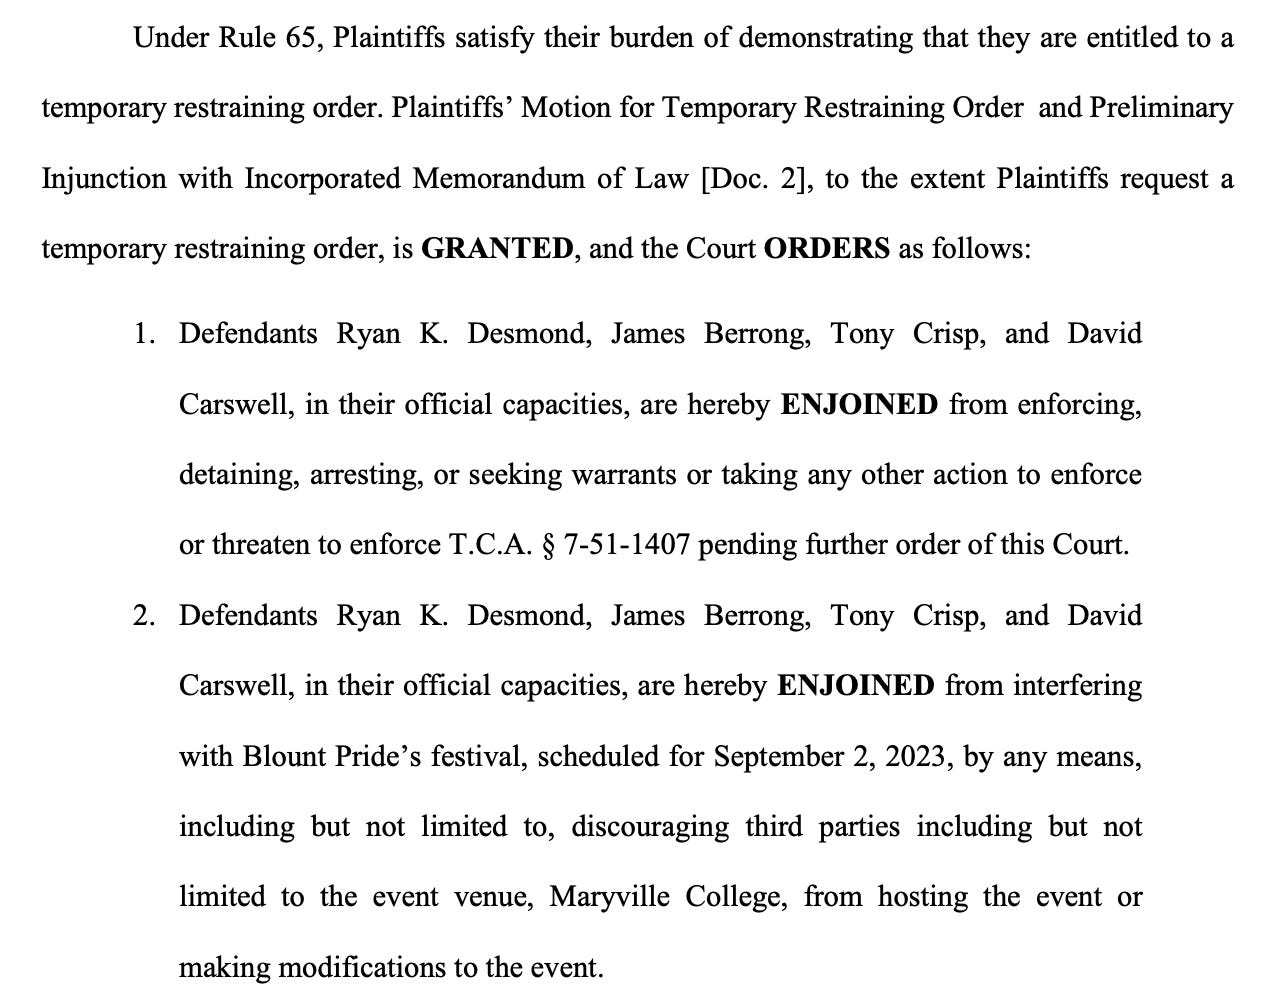 Under Rule 65, Plaintiffs satisfy their burden of demonstrating that they are entitled to a temporary restraining order. Plaintiffs’ Motion for Temporary Restraining Order and Preliminary Injunction with Incorporated Memorandum of Law [Doc. 2], to the extent Plaintiffs request a temporary restraining order, is GRANTED, and the Court ORDERS as follows: 1. Defendants Ryan K. Desmond, James Berrong, Tony Crisp, and David Carswell, in their official capacities, are hereby ENJOINED from enforcing, detaining, arresting, or seeking warrants or taking any other action to enforce or threaten to enforce T.C.A. § 7-51-1407 pending further order of this Court. 2. Defendants Ryan K. Desmond, James Berrong, Tony Crisp, and David Carswell, in their official capacities, are hereby ENJOINED from interfering with Blount Pride’s festival, scheduled for September 2, 2023, by any means, including but not limited to, discouraging third parties including but not limited to the event venue, Maryville College, from hosting the event or making modifications to the event.